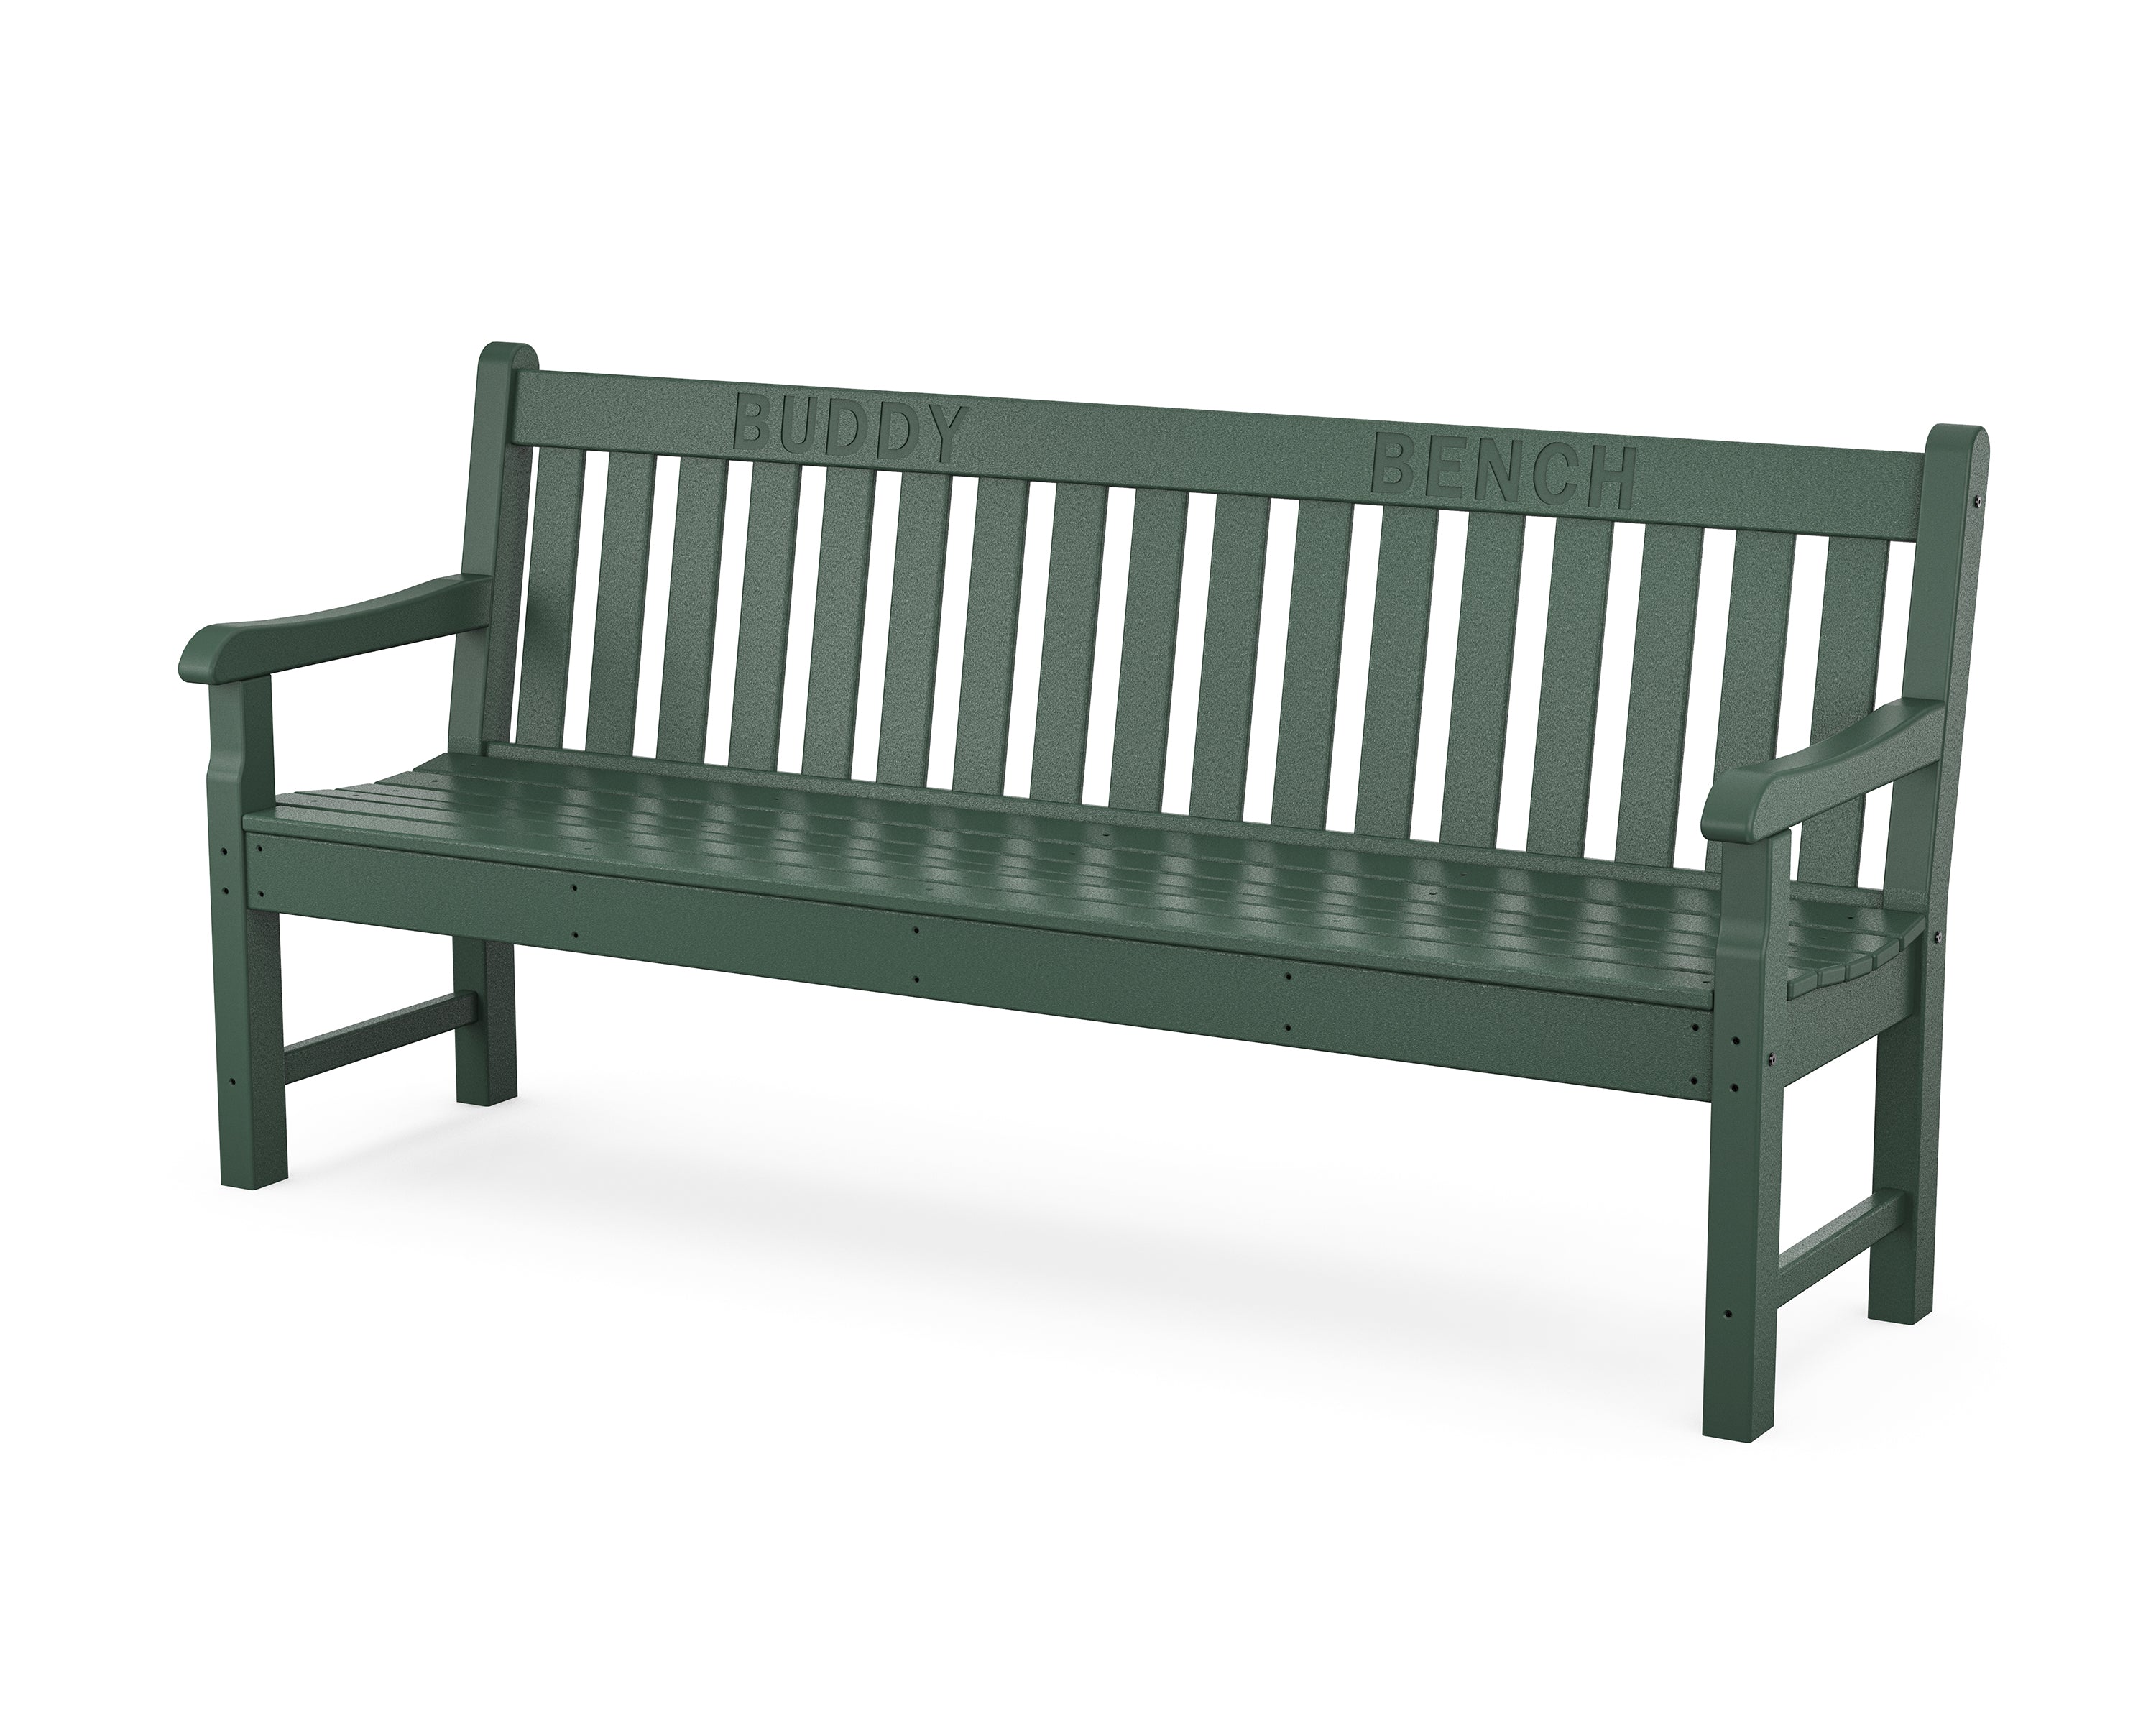 POLYWOOD® 72” Buddy Bench in Green